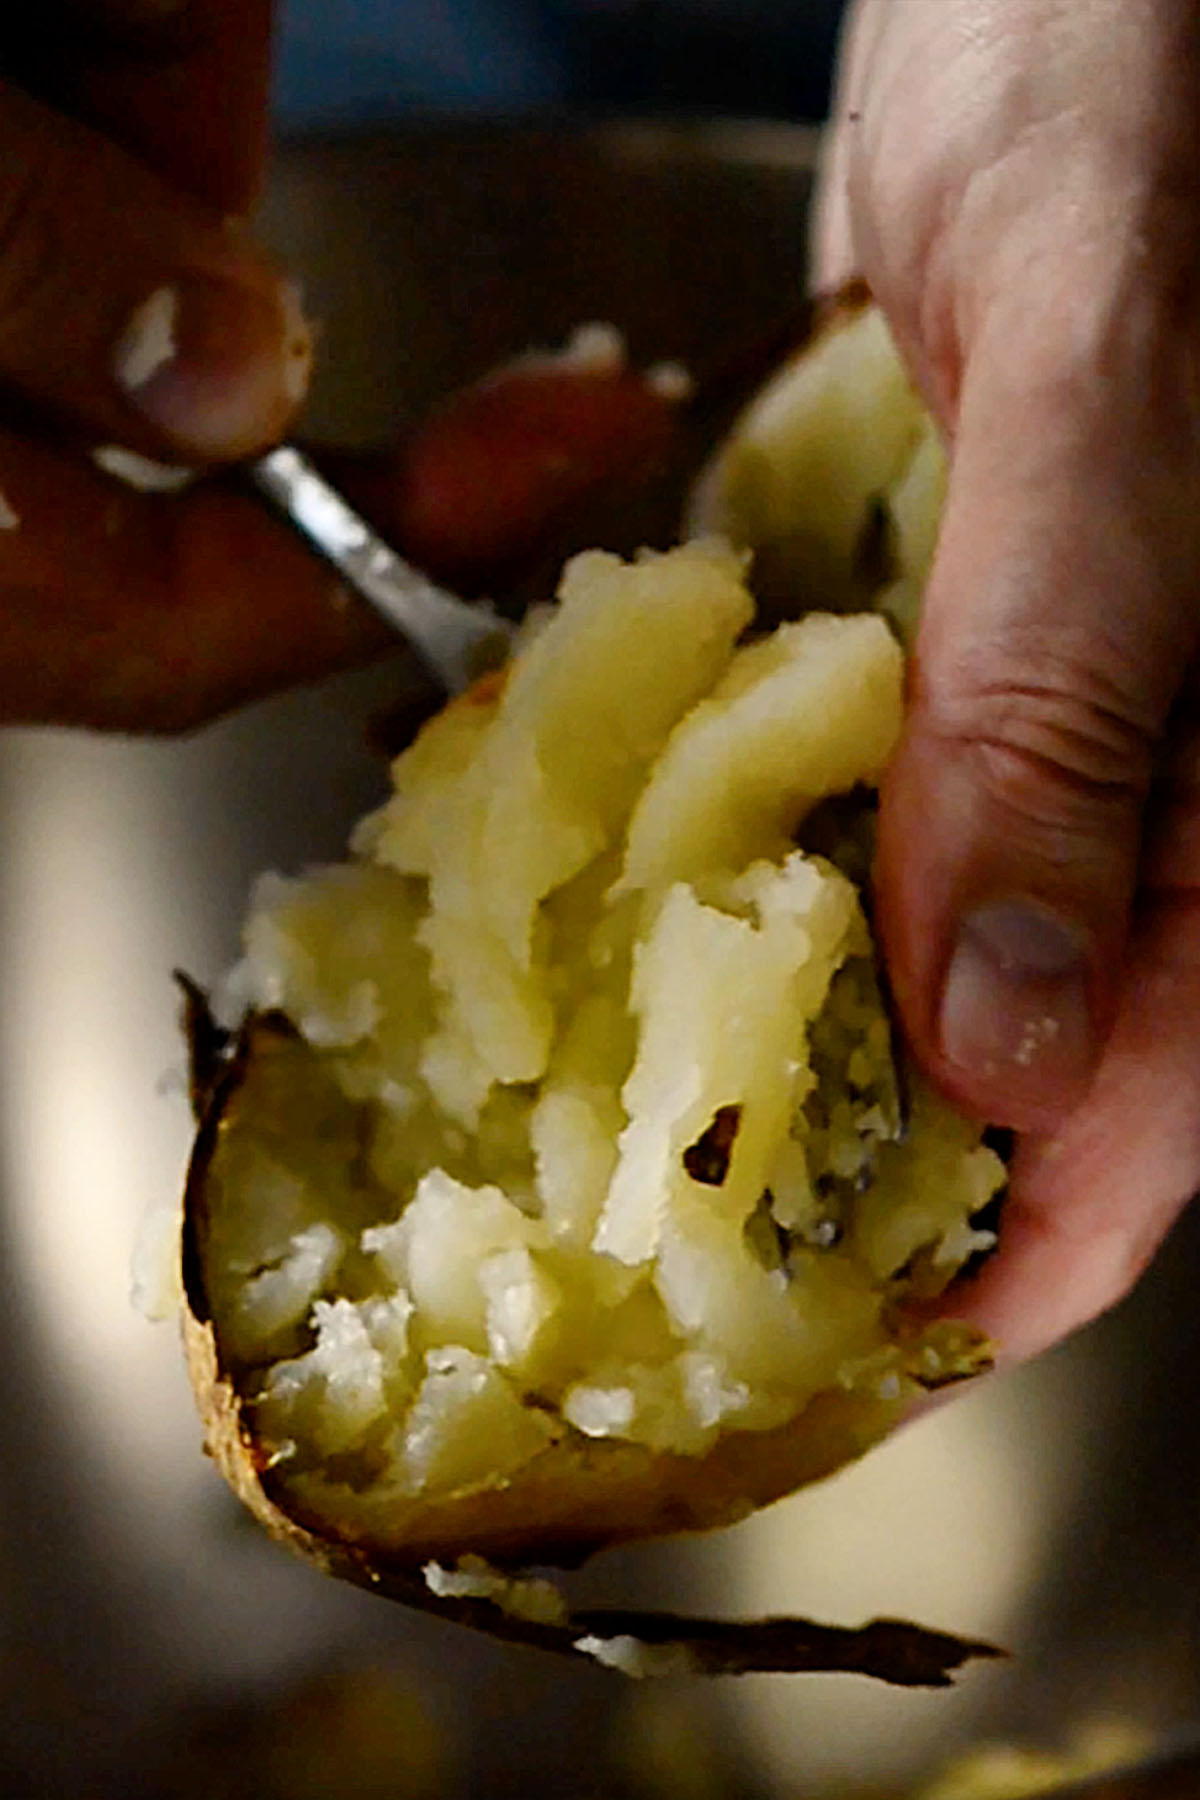 Baked potato being scooped out with a spoon.